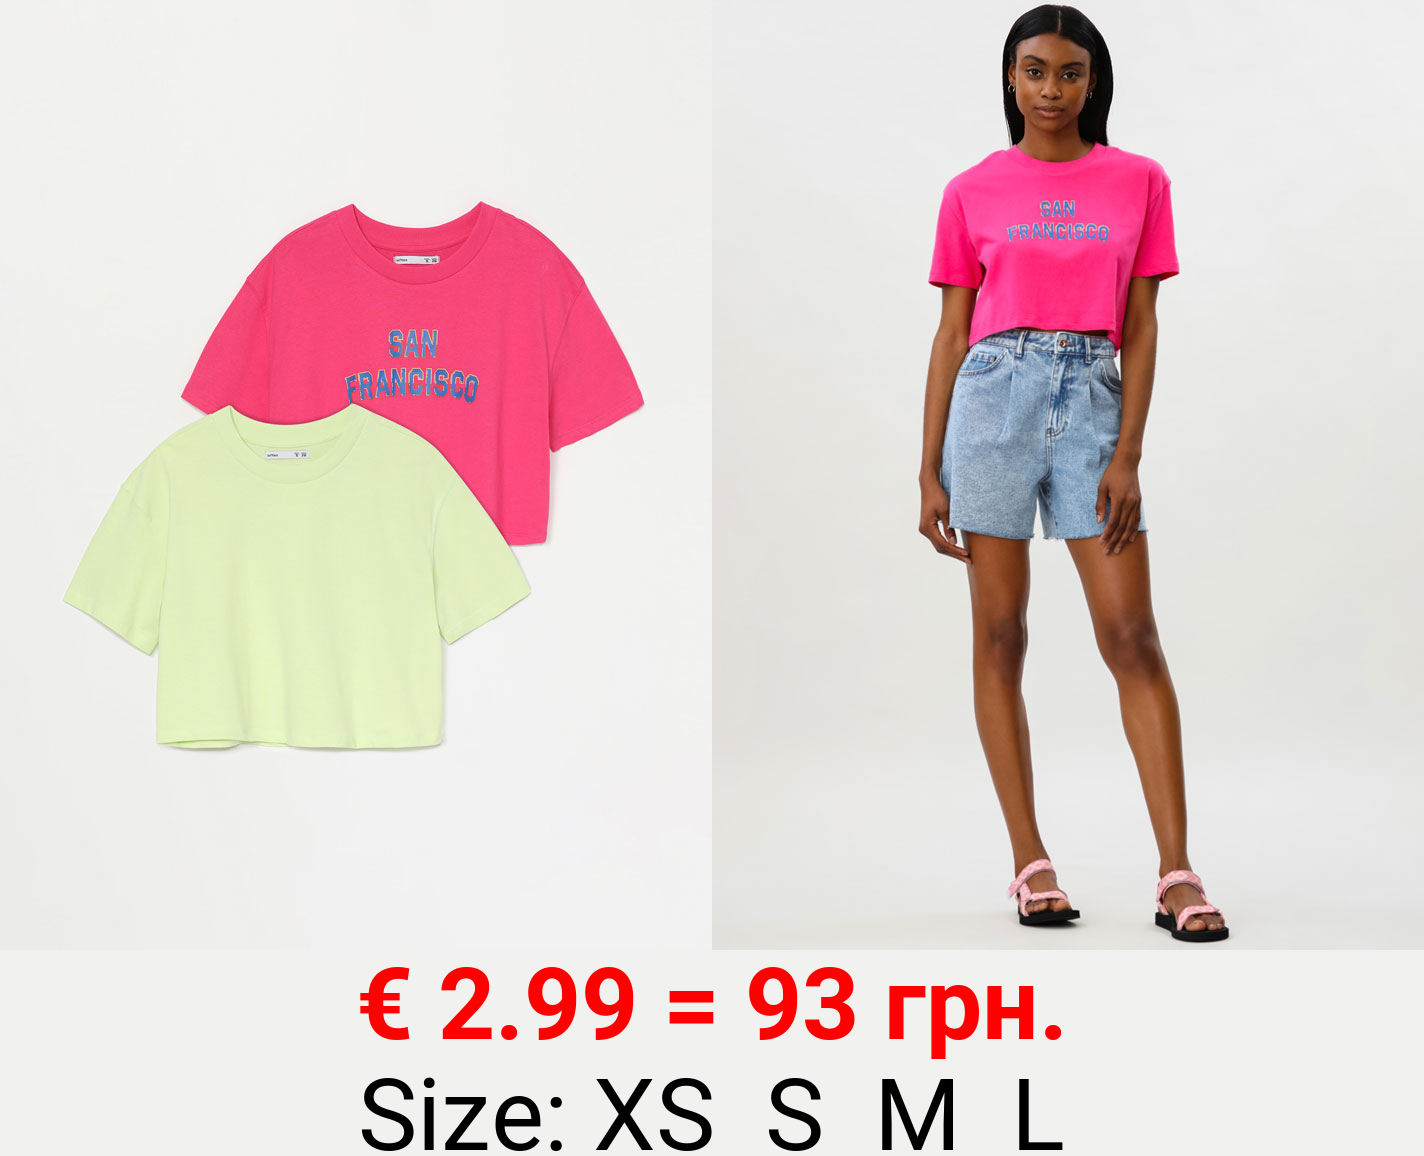 Pack of 2 plain and printed cropped T-shirts.